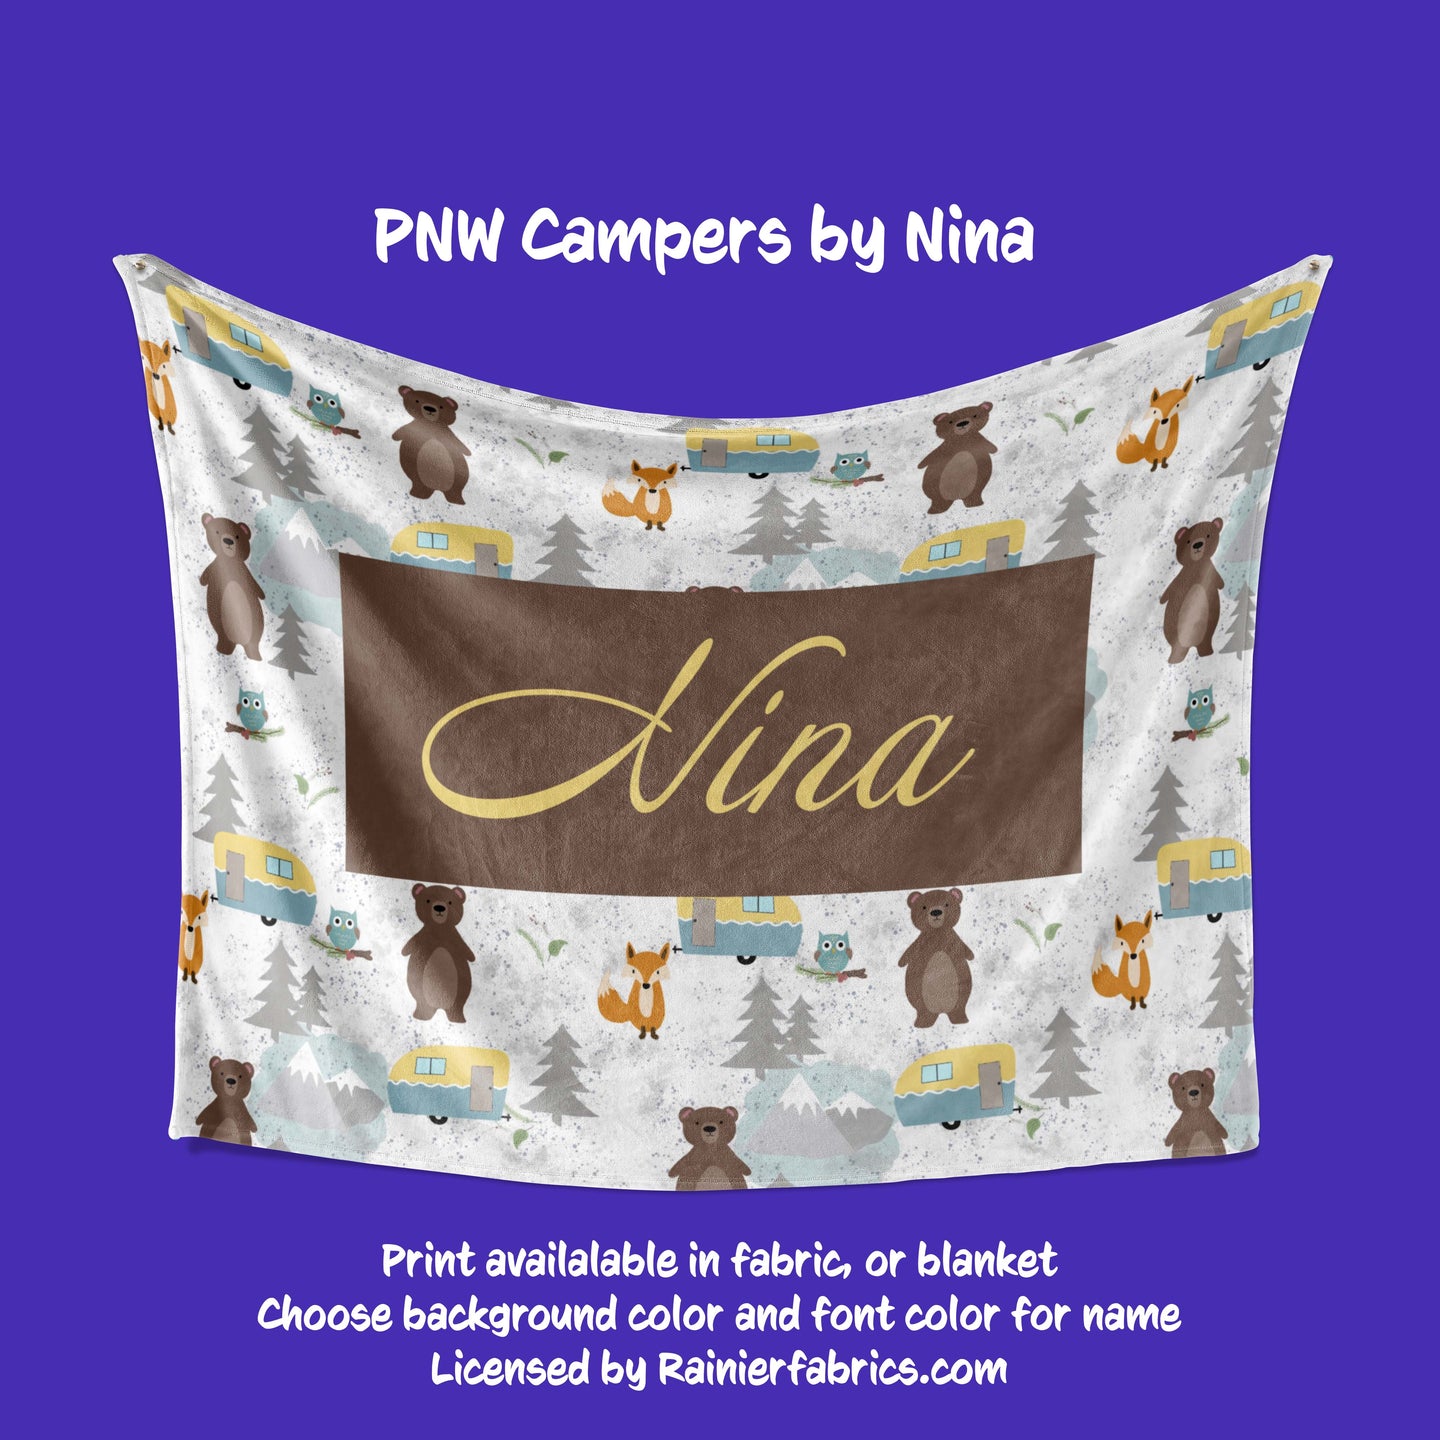 PNW Campers with Options by Nina - Blanket